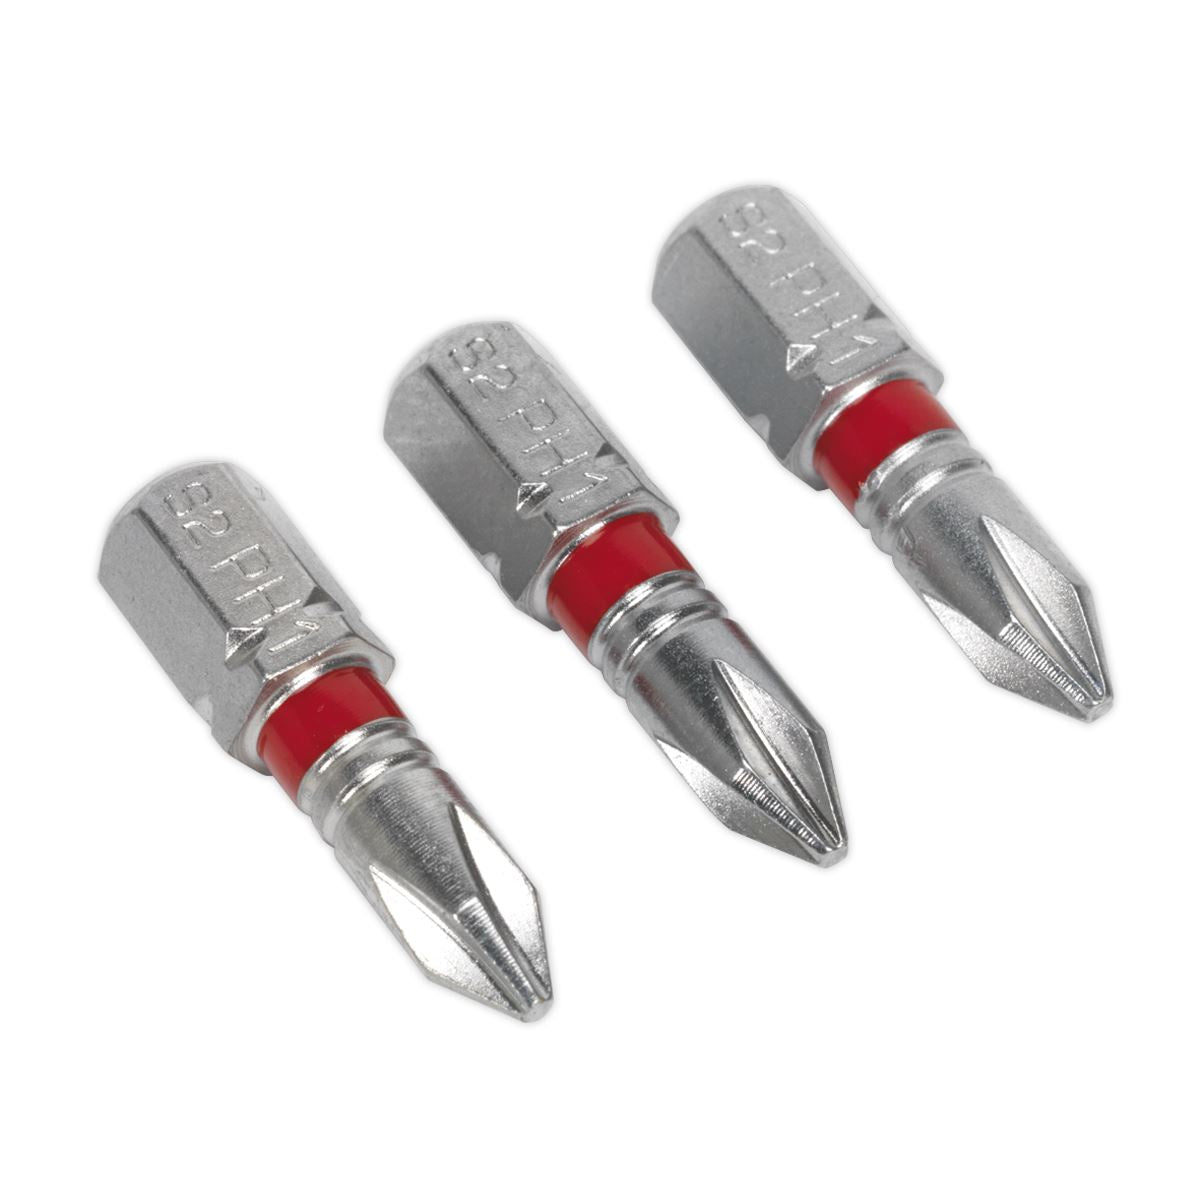 Sealey Screwdriver Bits Colour Coded S2 Steel 3 Pack Pozi Phillips Slotted 25mm 75mm